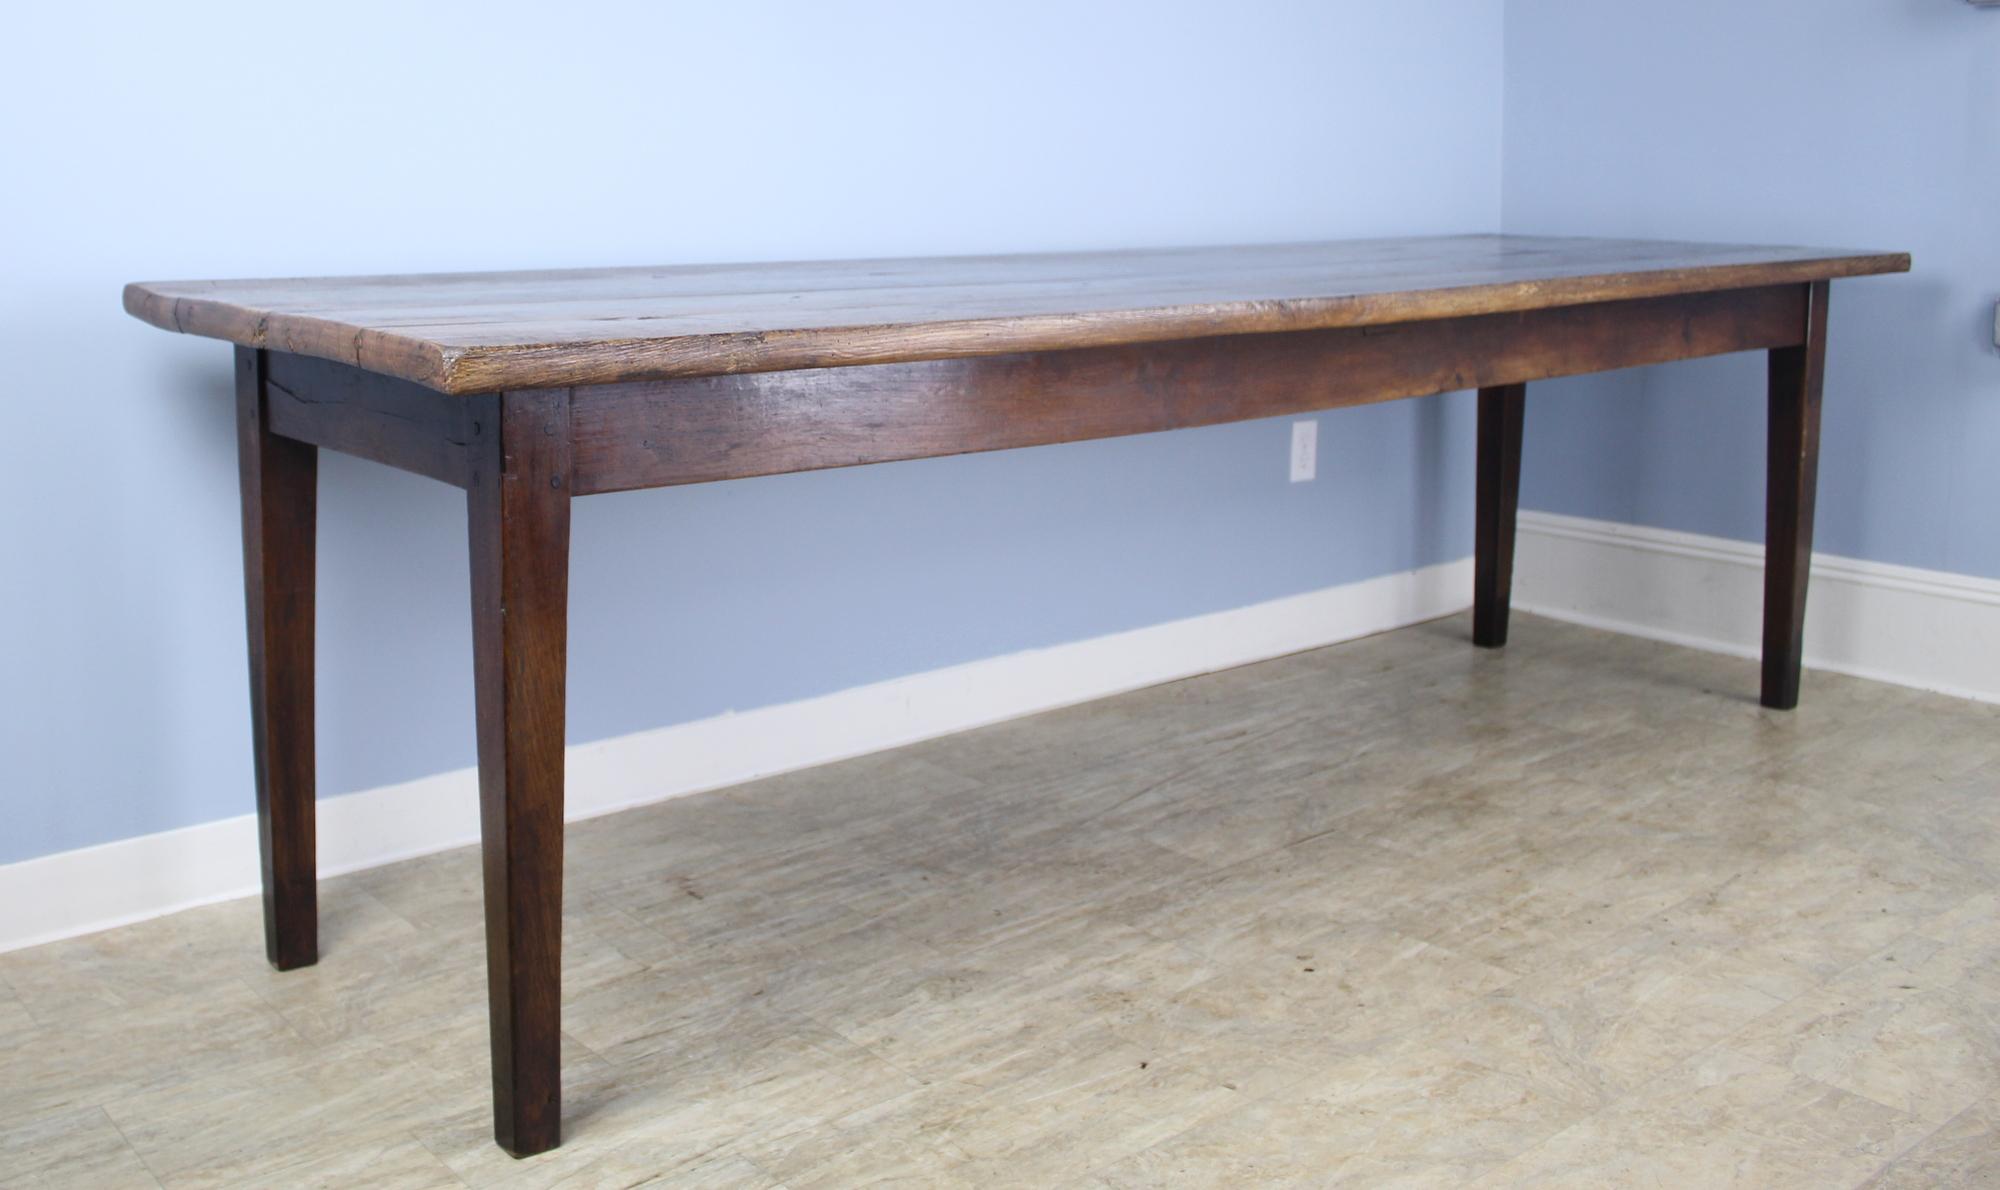 A sturdy and handsome long French ash farm table with classic tapered legs and a chunky thick top. The color and grain on this table are lovely, as is the patina and shine. The 24.5 inch apron height is good for knees. 91.5 inches between the legs